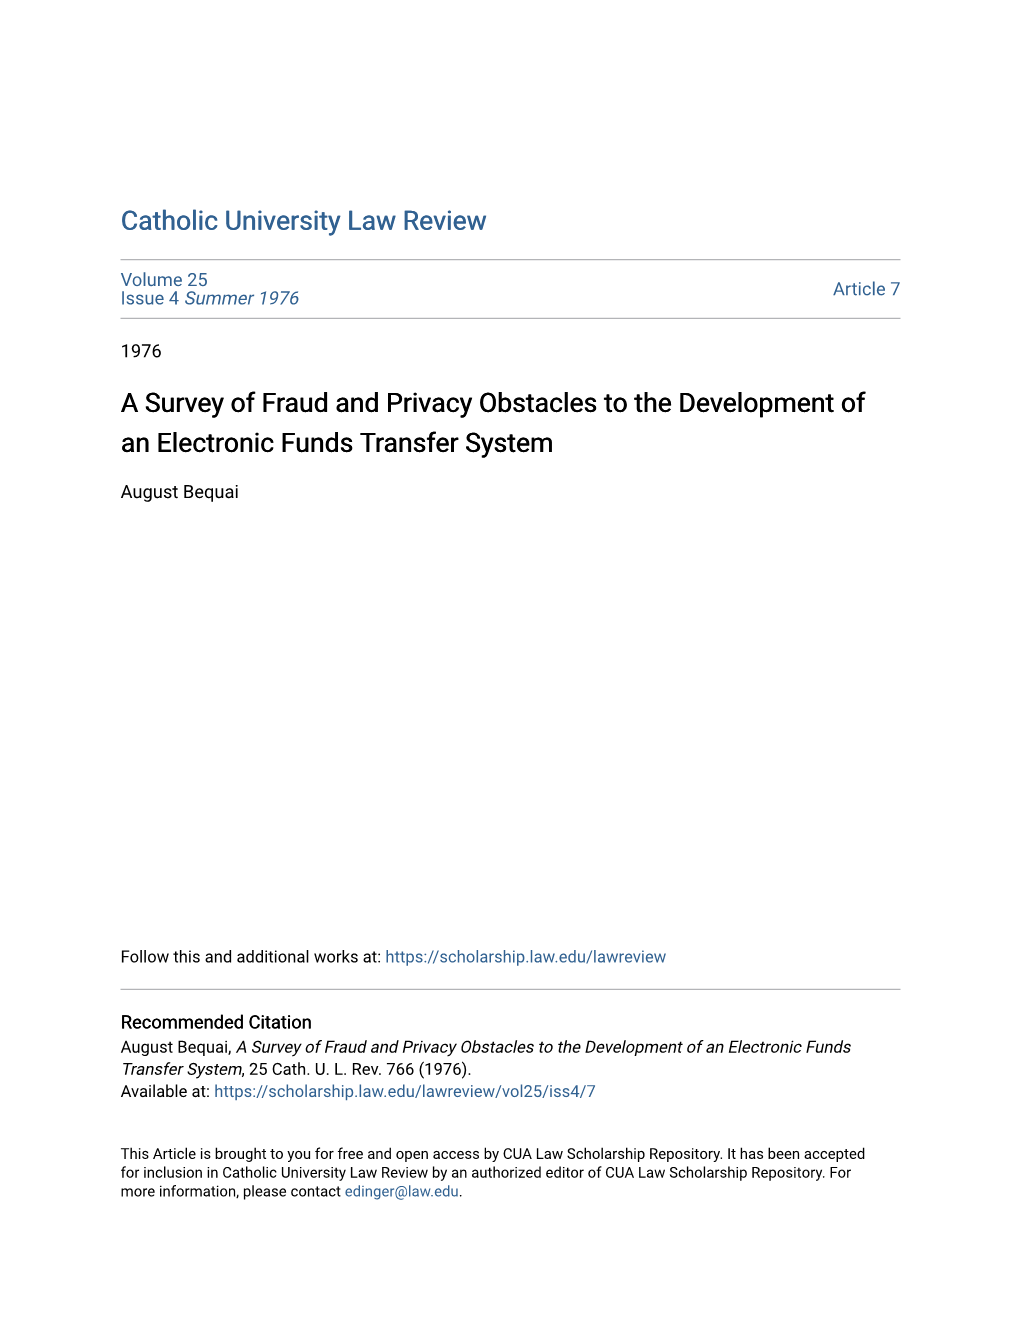 A Survey of Fraud and Privacy Obstacles to the Development of an Electronic Funds Transfer System